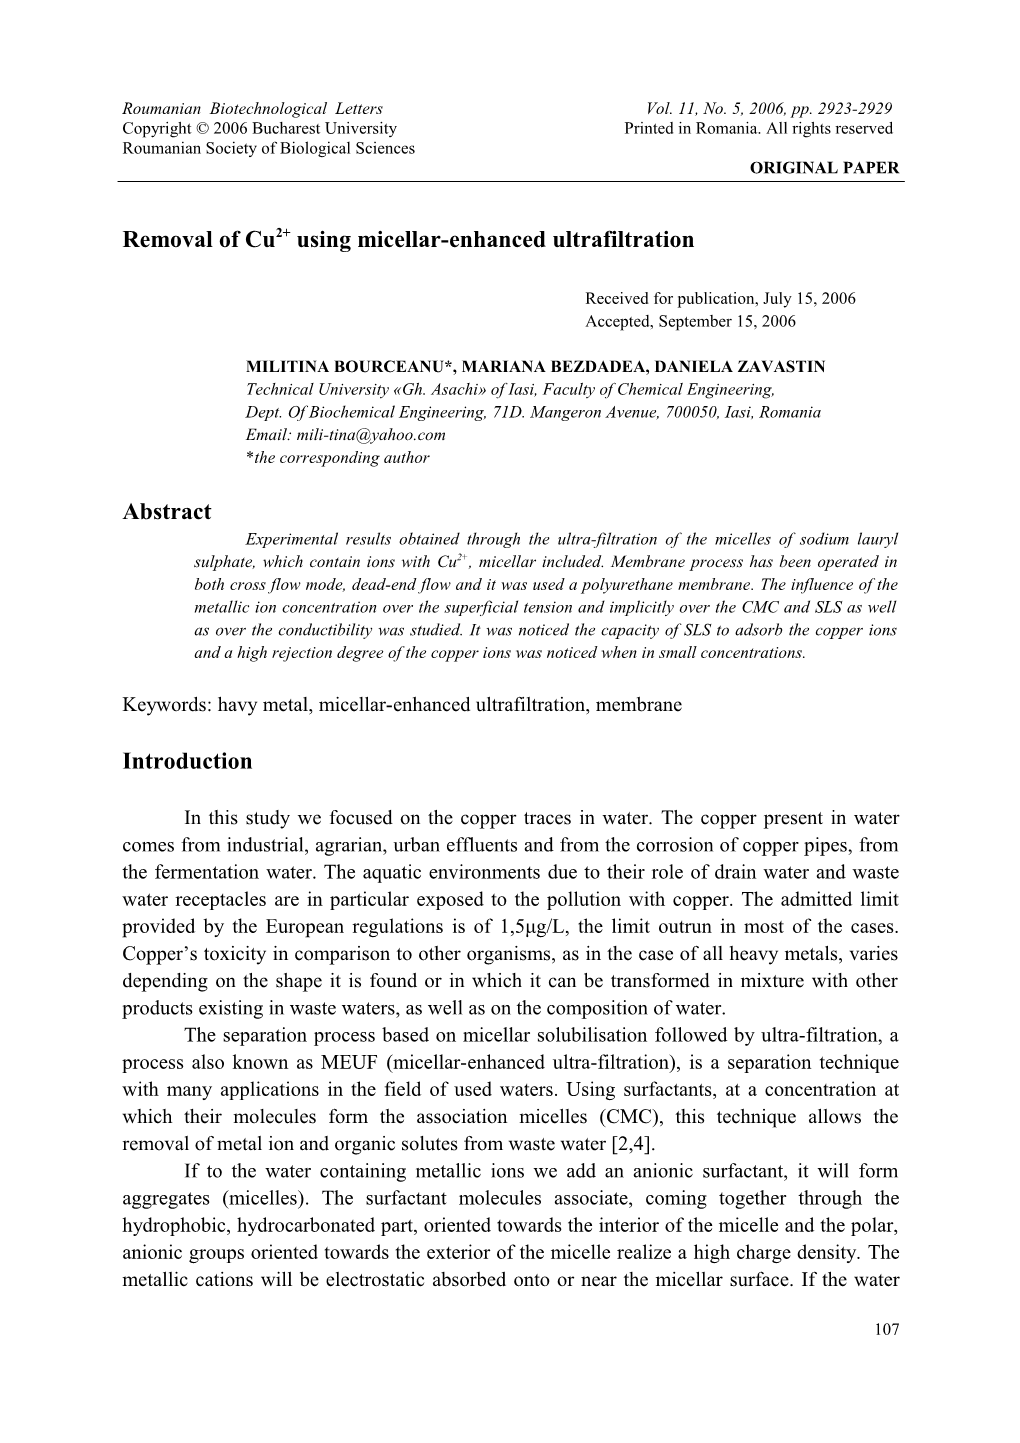 Evaluation of the Hydrodynamic Regime of Aerobic Stirred Bioreactors Using the Mixing